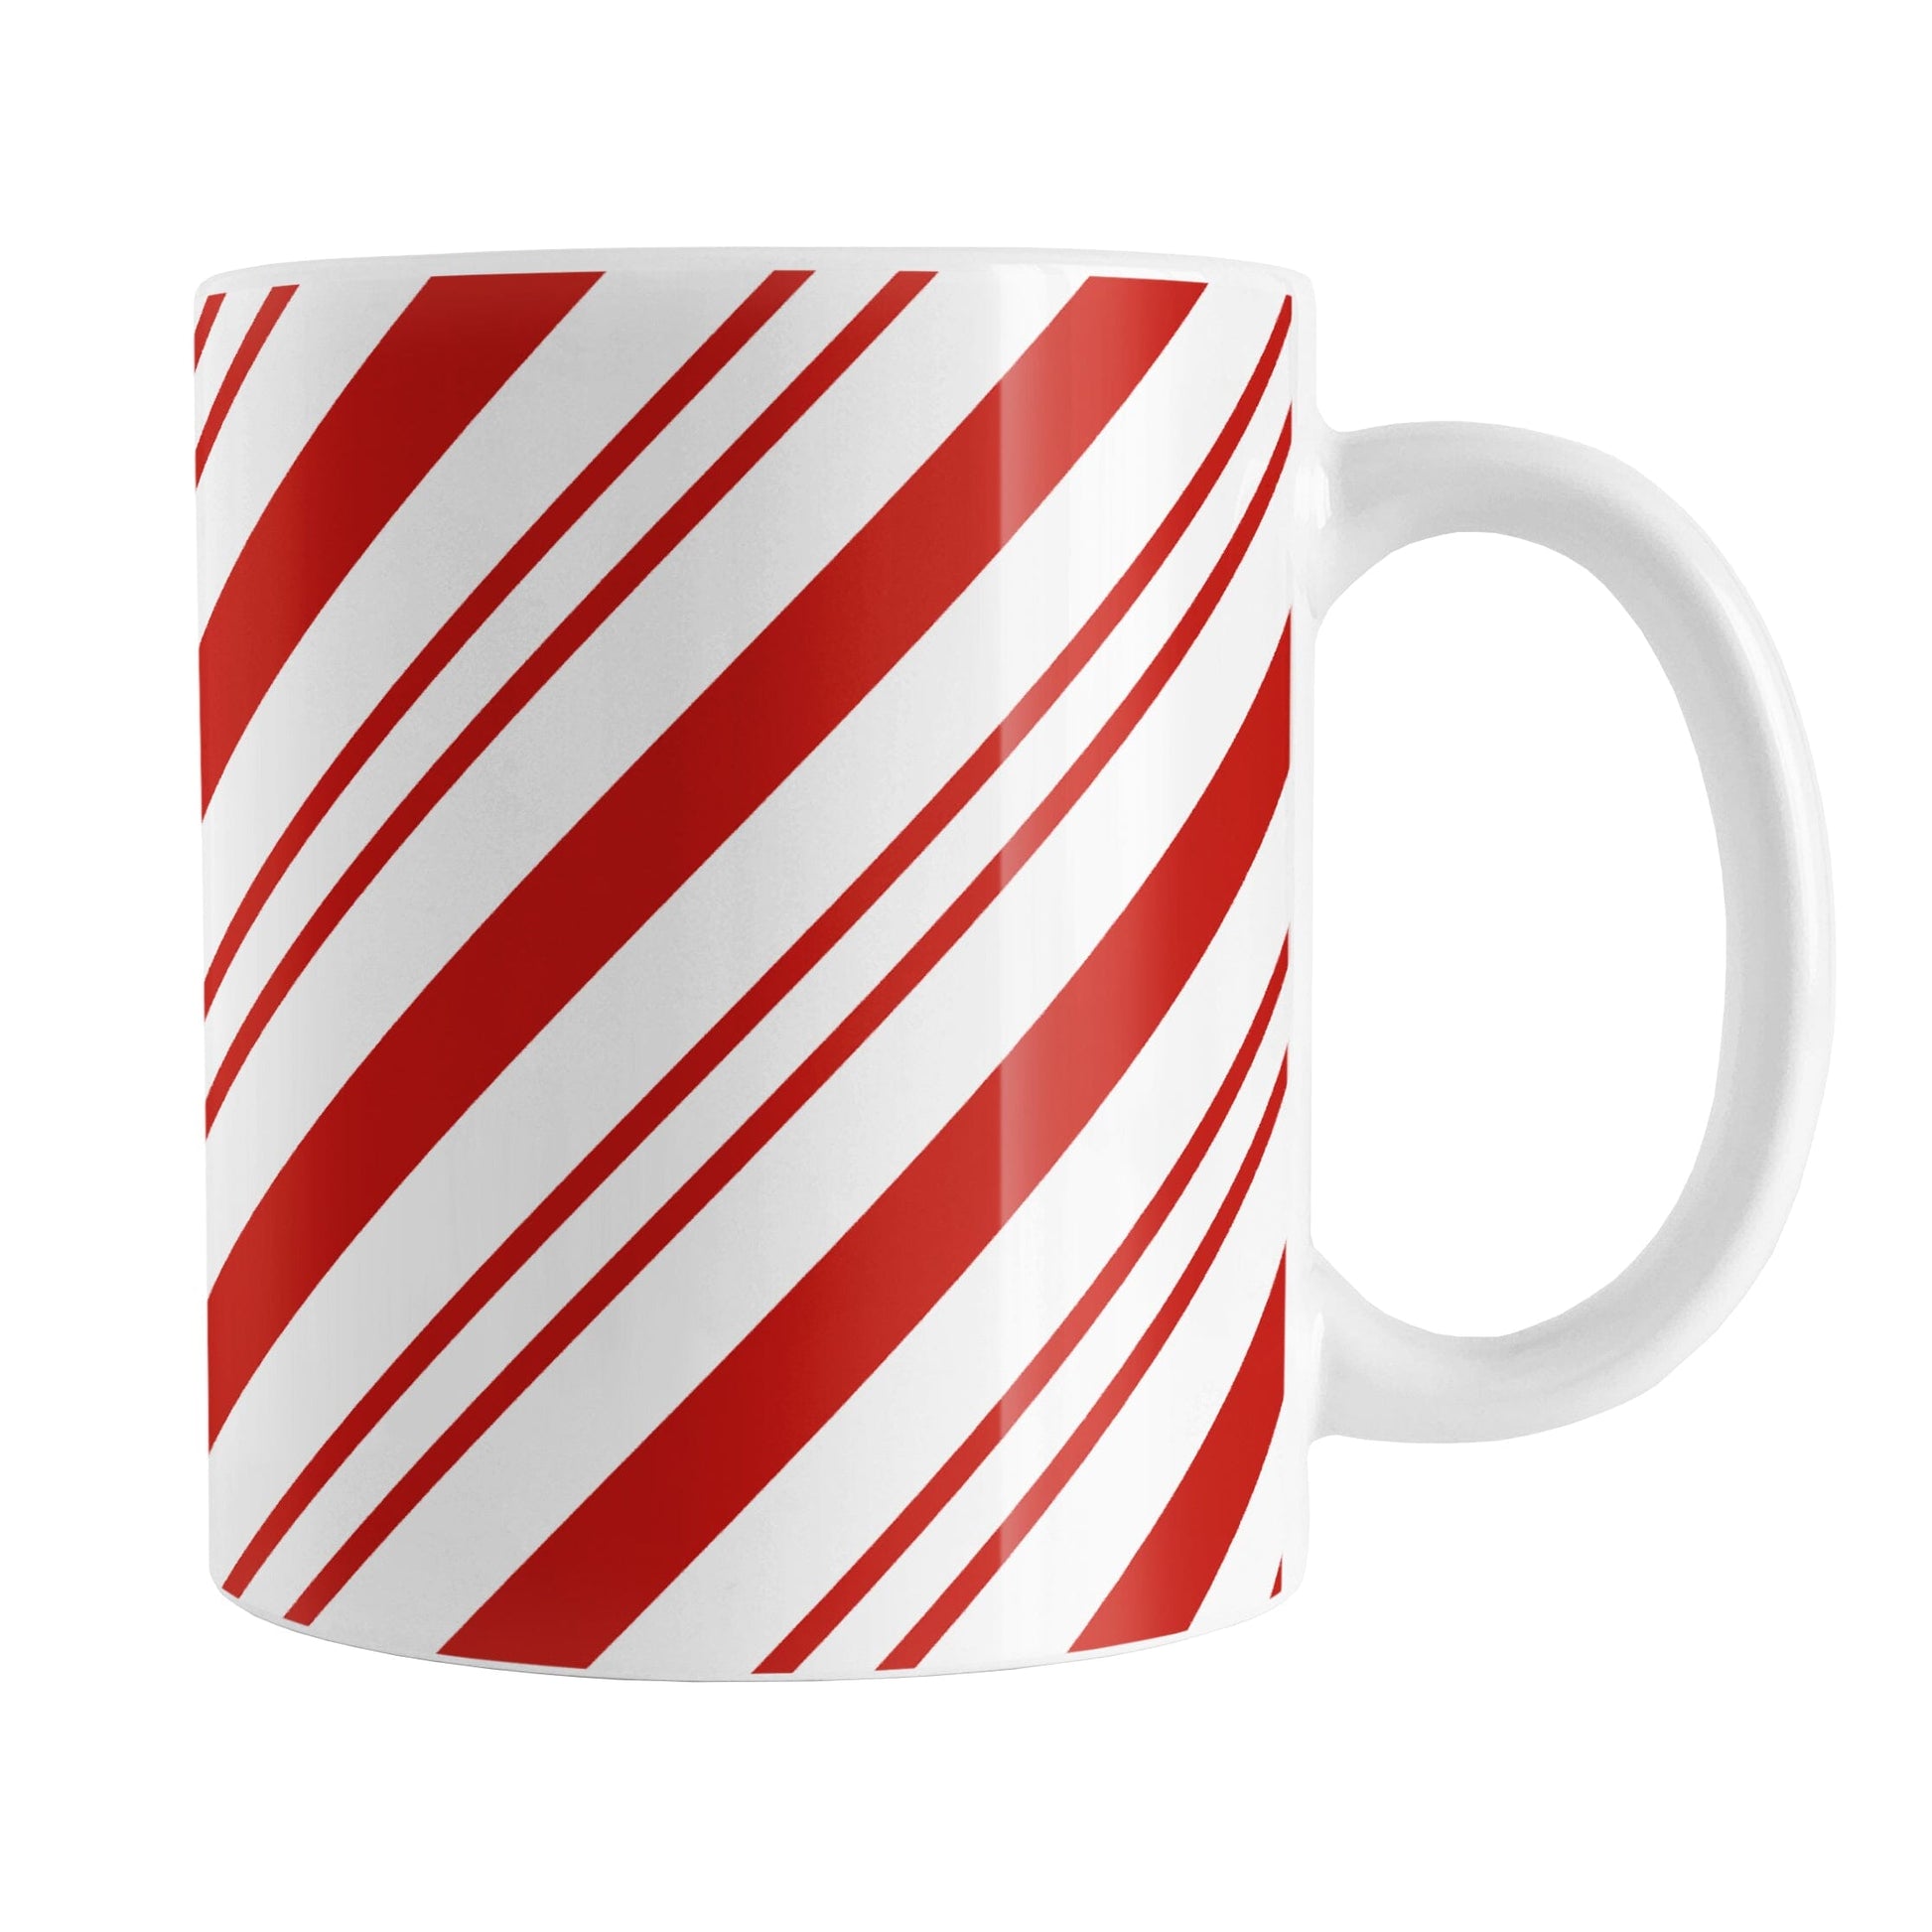 Candy Cane Stripe Mug (11oz) at Amy's Coffee Mugs. A ceramic coffee mug designed with a diagonal white and red candy cane-style stripe pattern that wraps around the mug up to the handle.